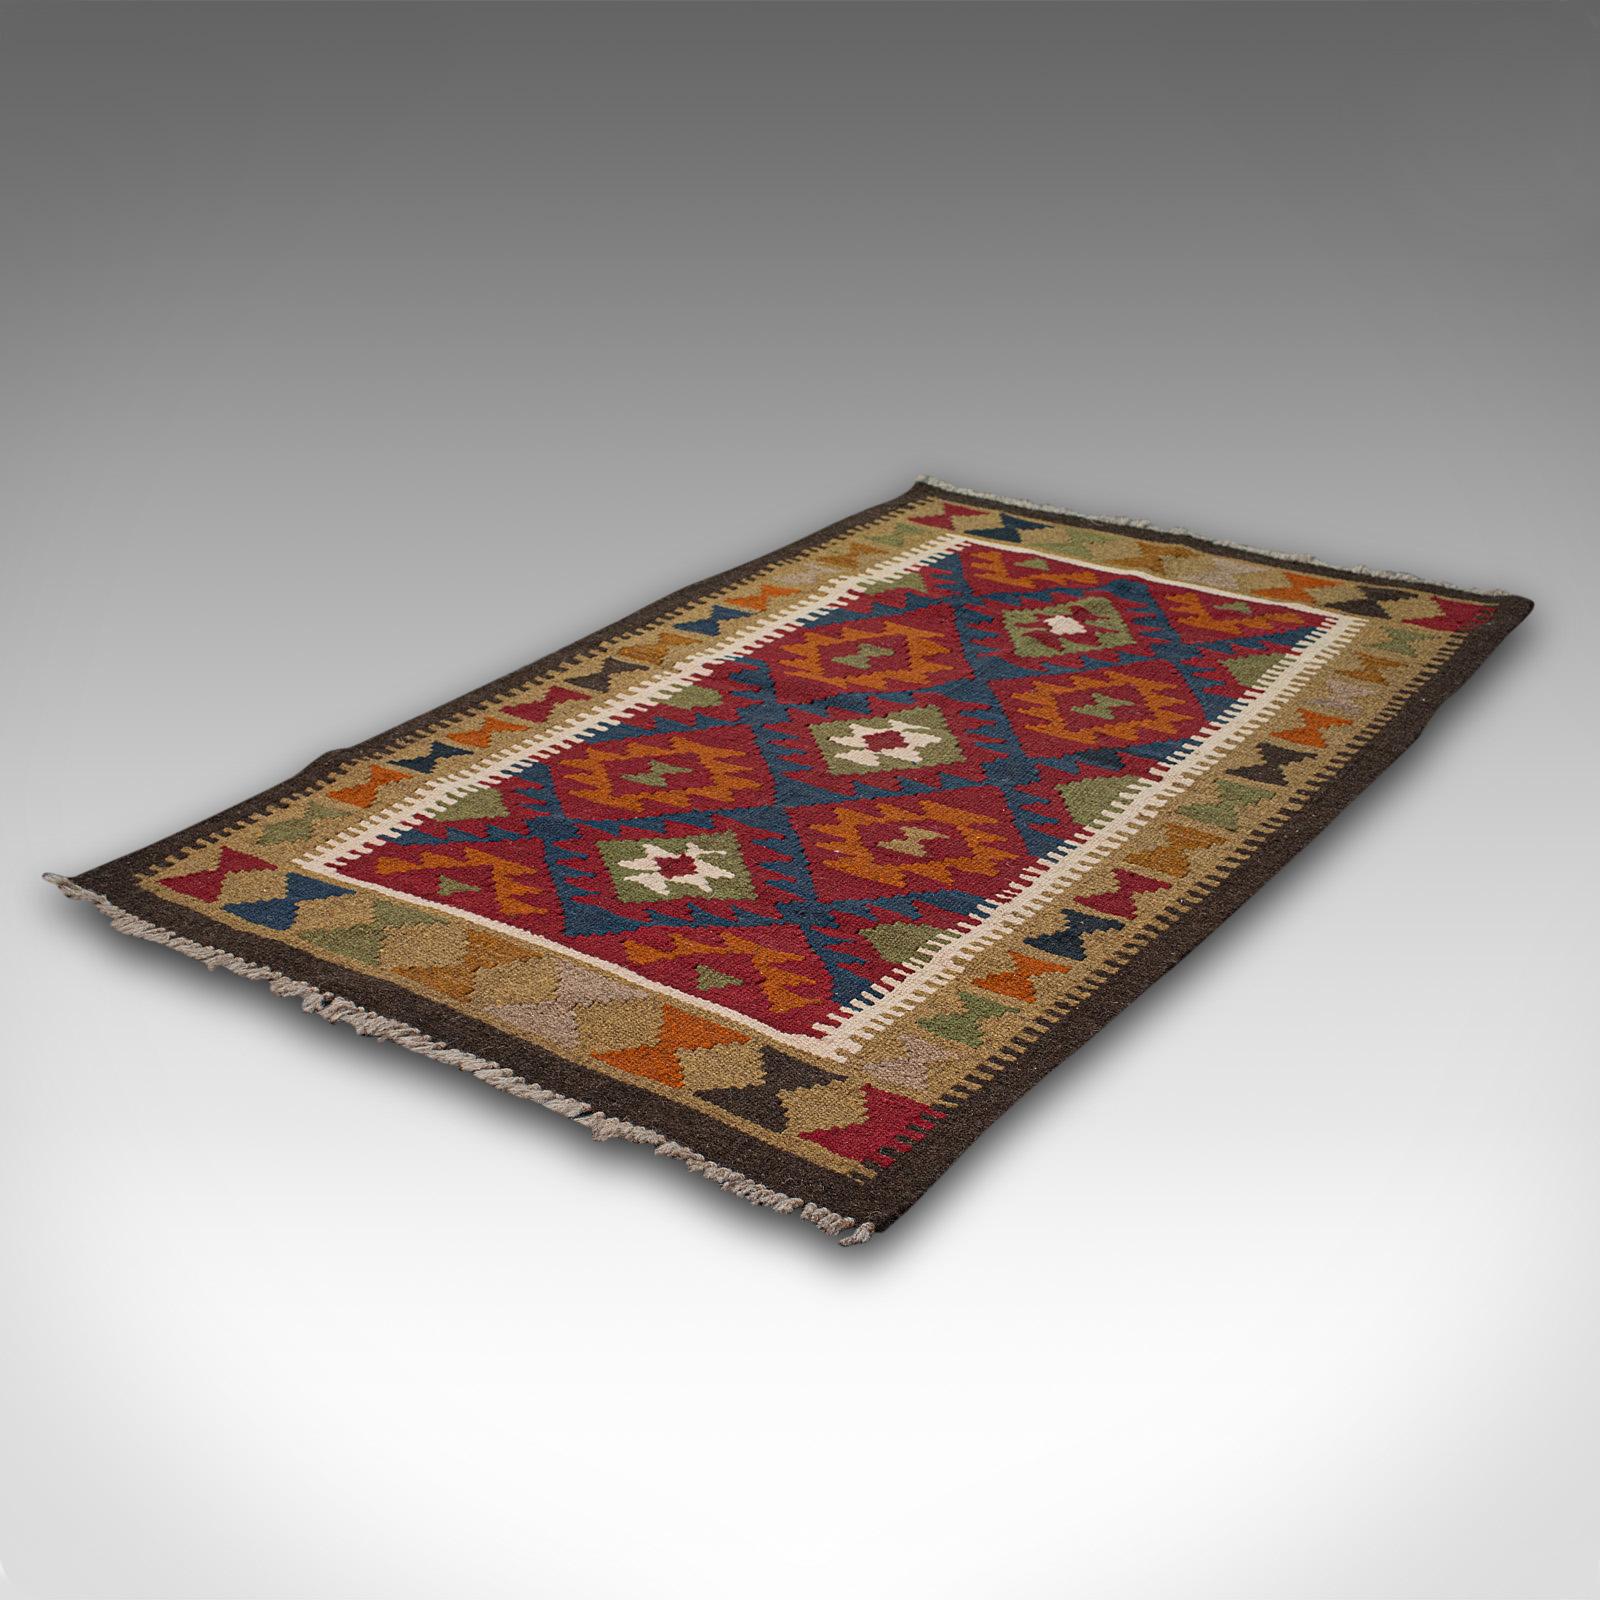 Small Vintage Maimana Kilim Carpet, Middle Eastern, Prayer Mat, Rug, Circa 1970 In Good Condition For Sale In Hele, Devon, GB